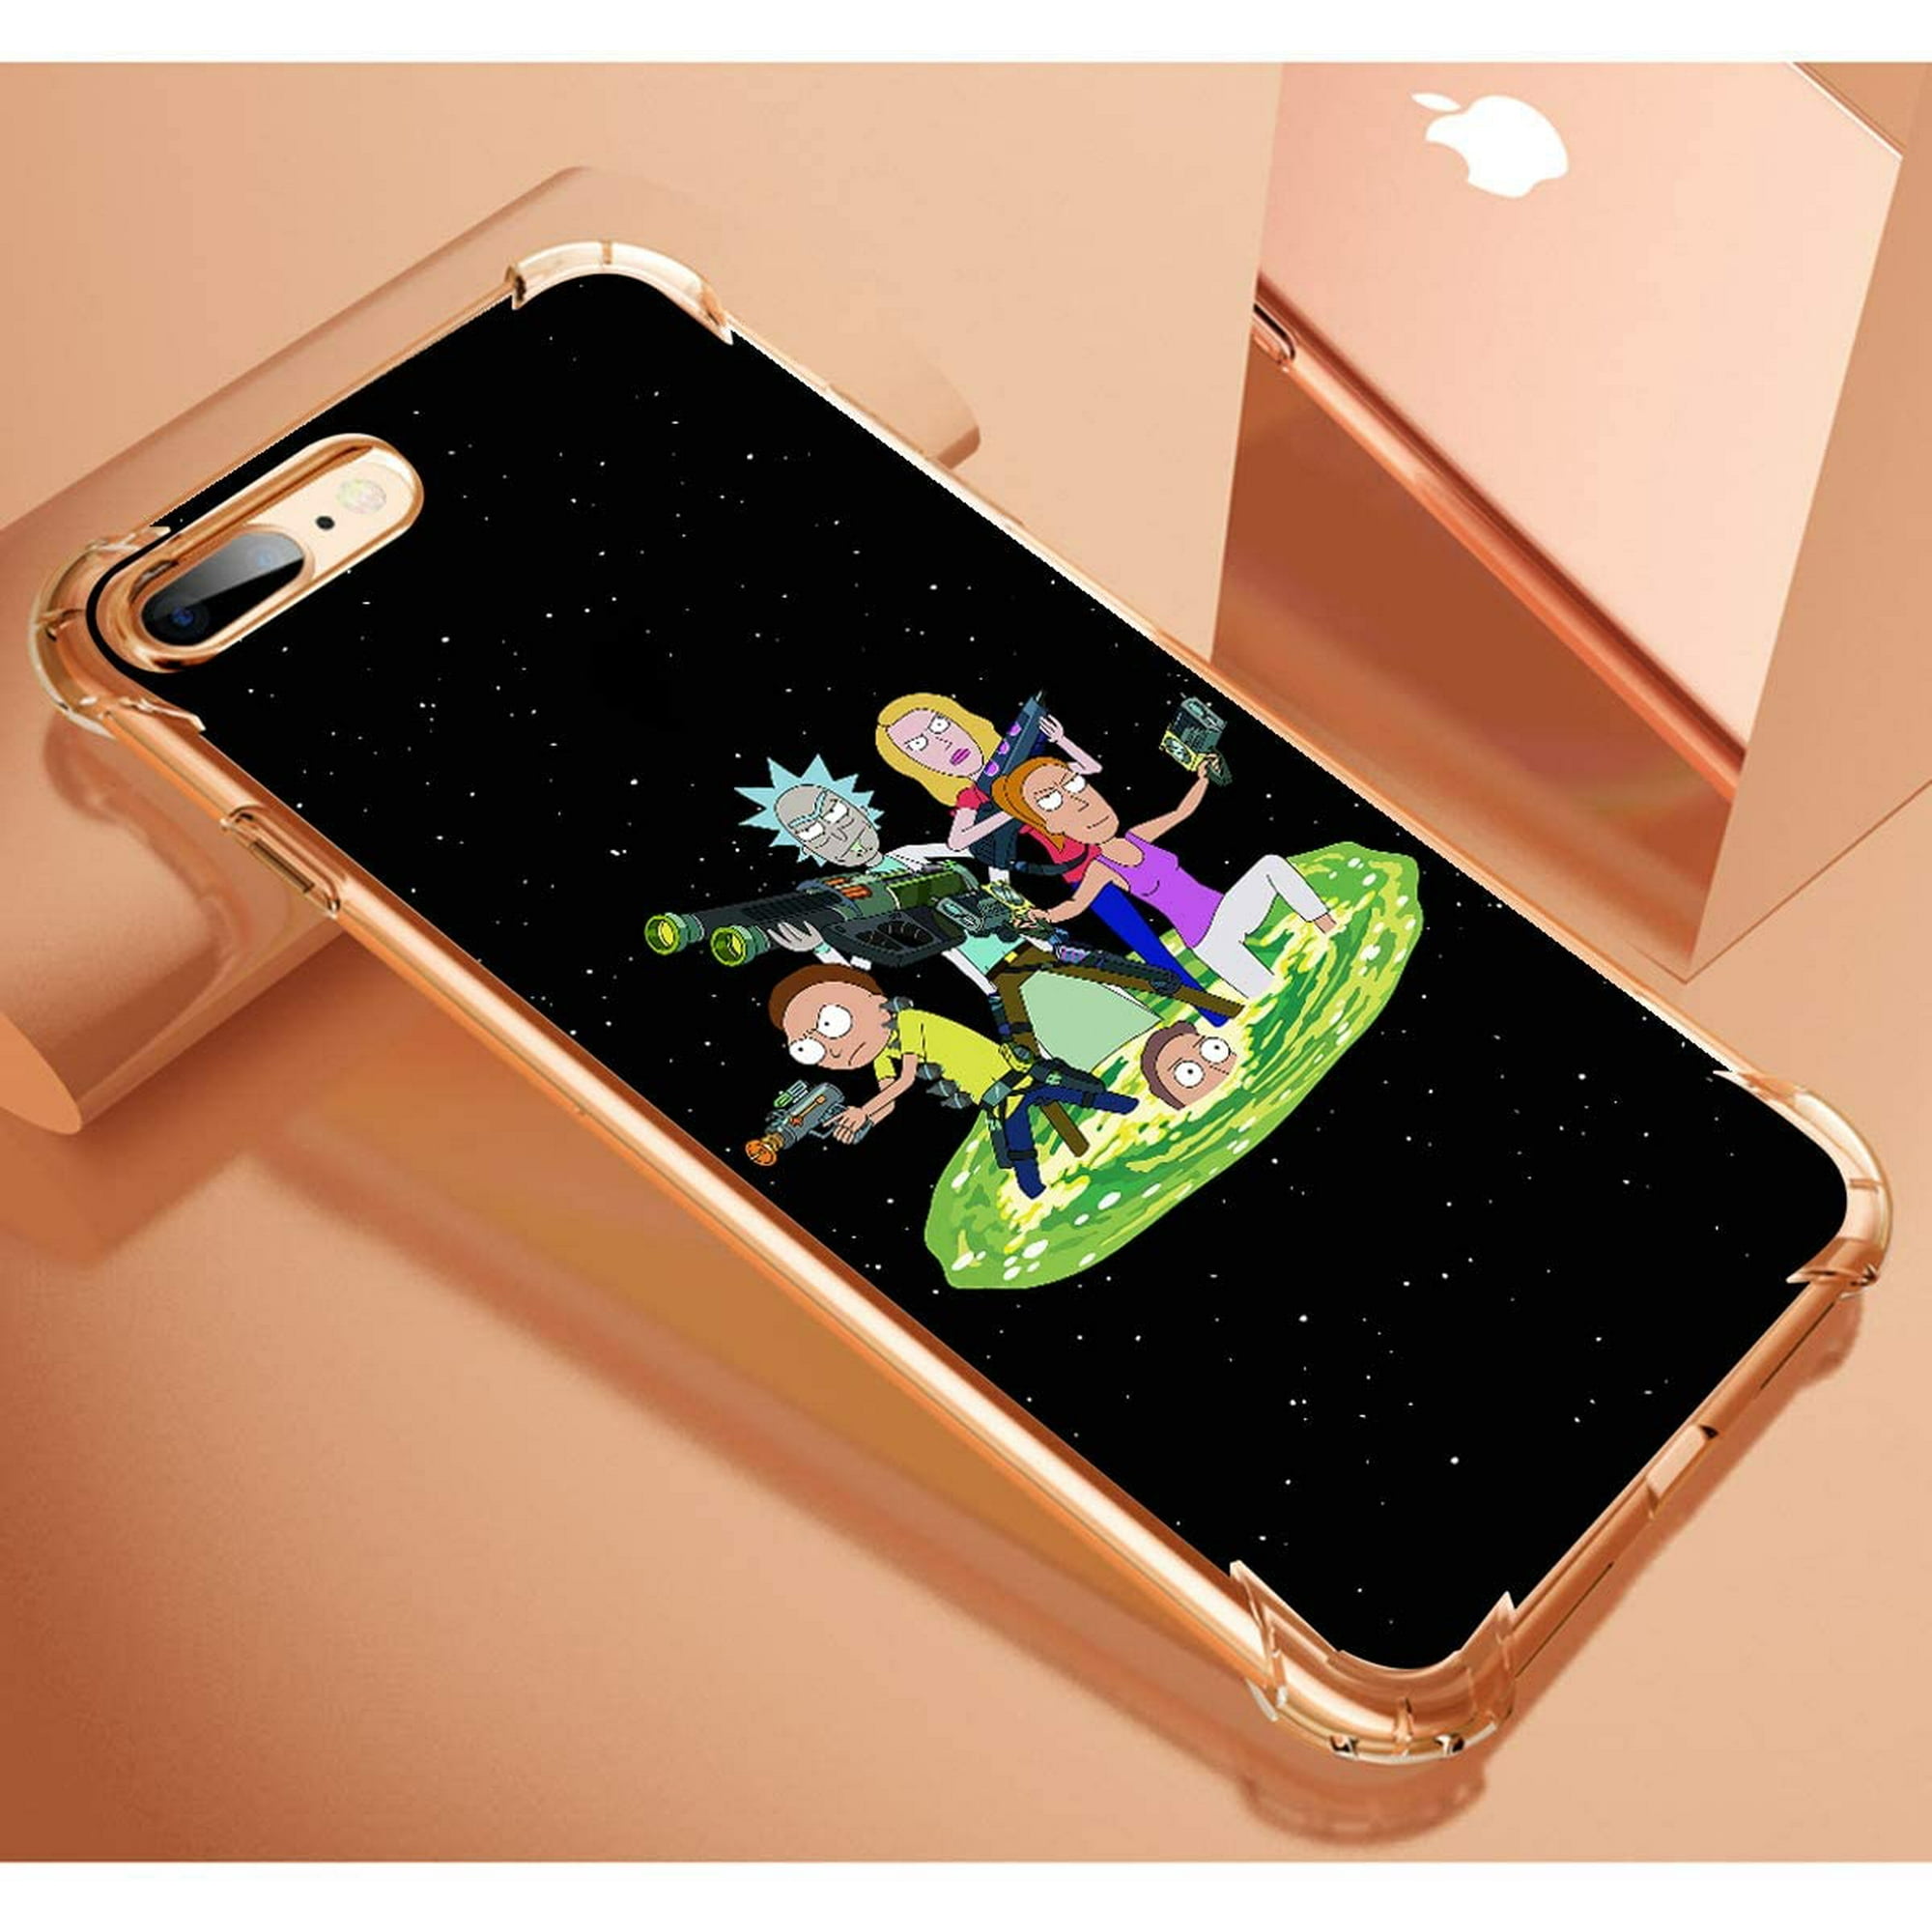 Bqhagfte For Iphone 7 Plus/8 Plus Case Cartoon Character Funny Cute Fun Tpu Design Cover For Girls Women Teen, Fashion Cool Unique Aesthetic Clear Cas